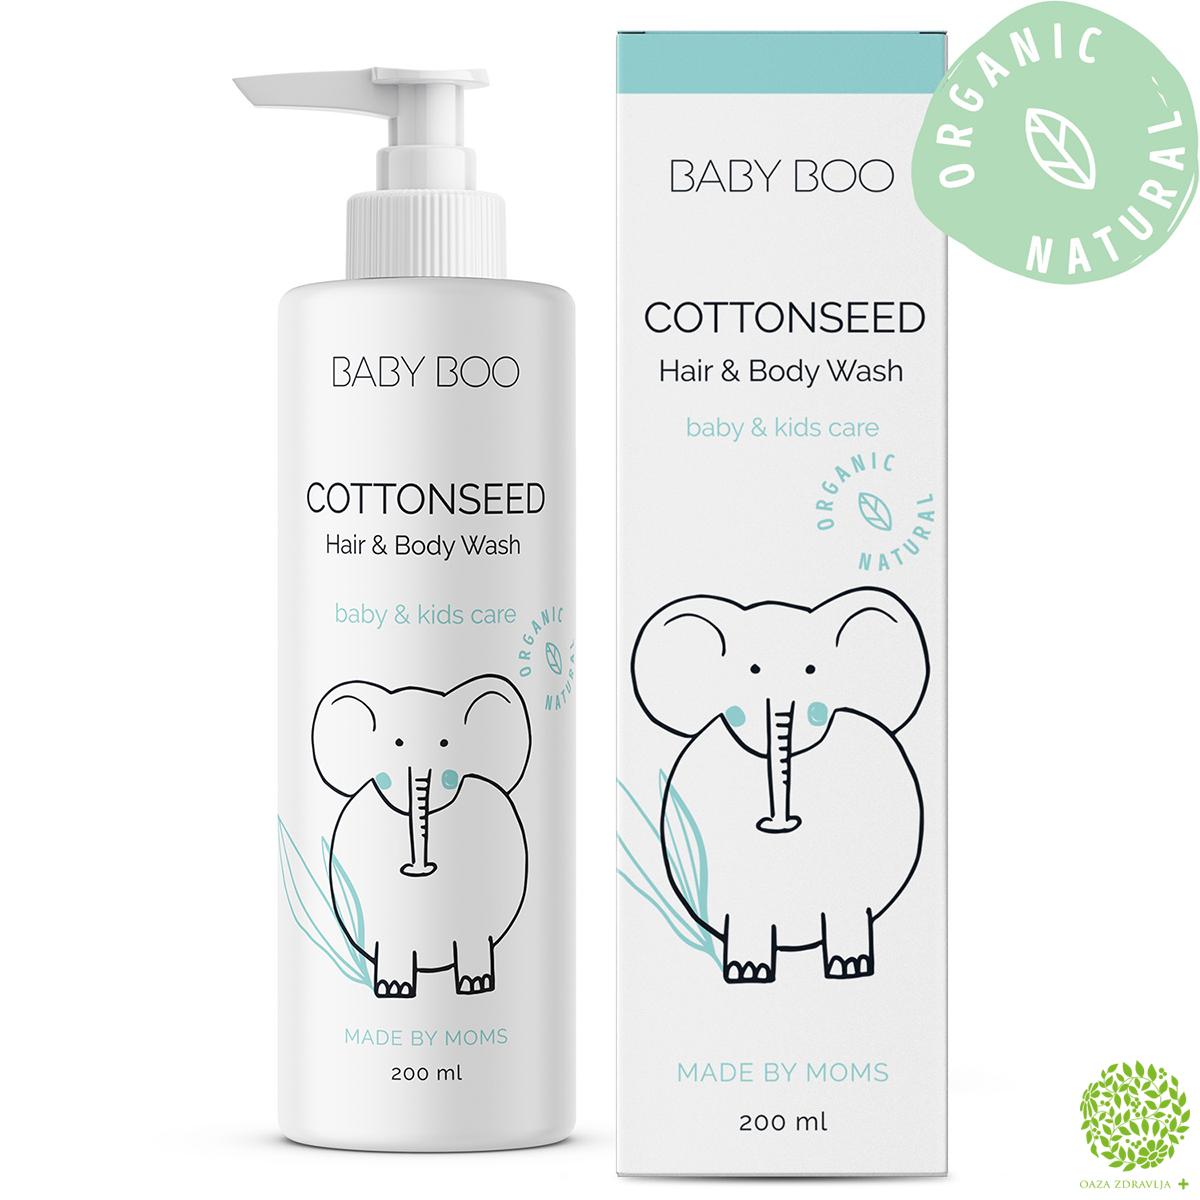 BABY BOO COTTONSEED HAIR&BODY WASH 200ml 